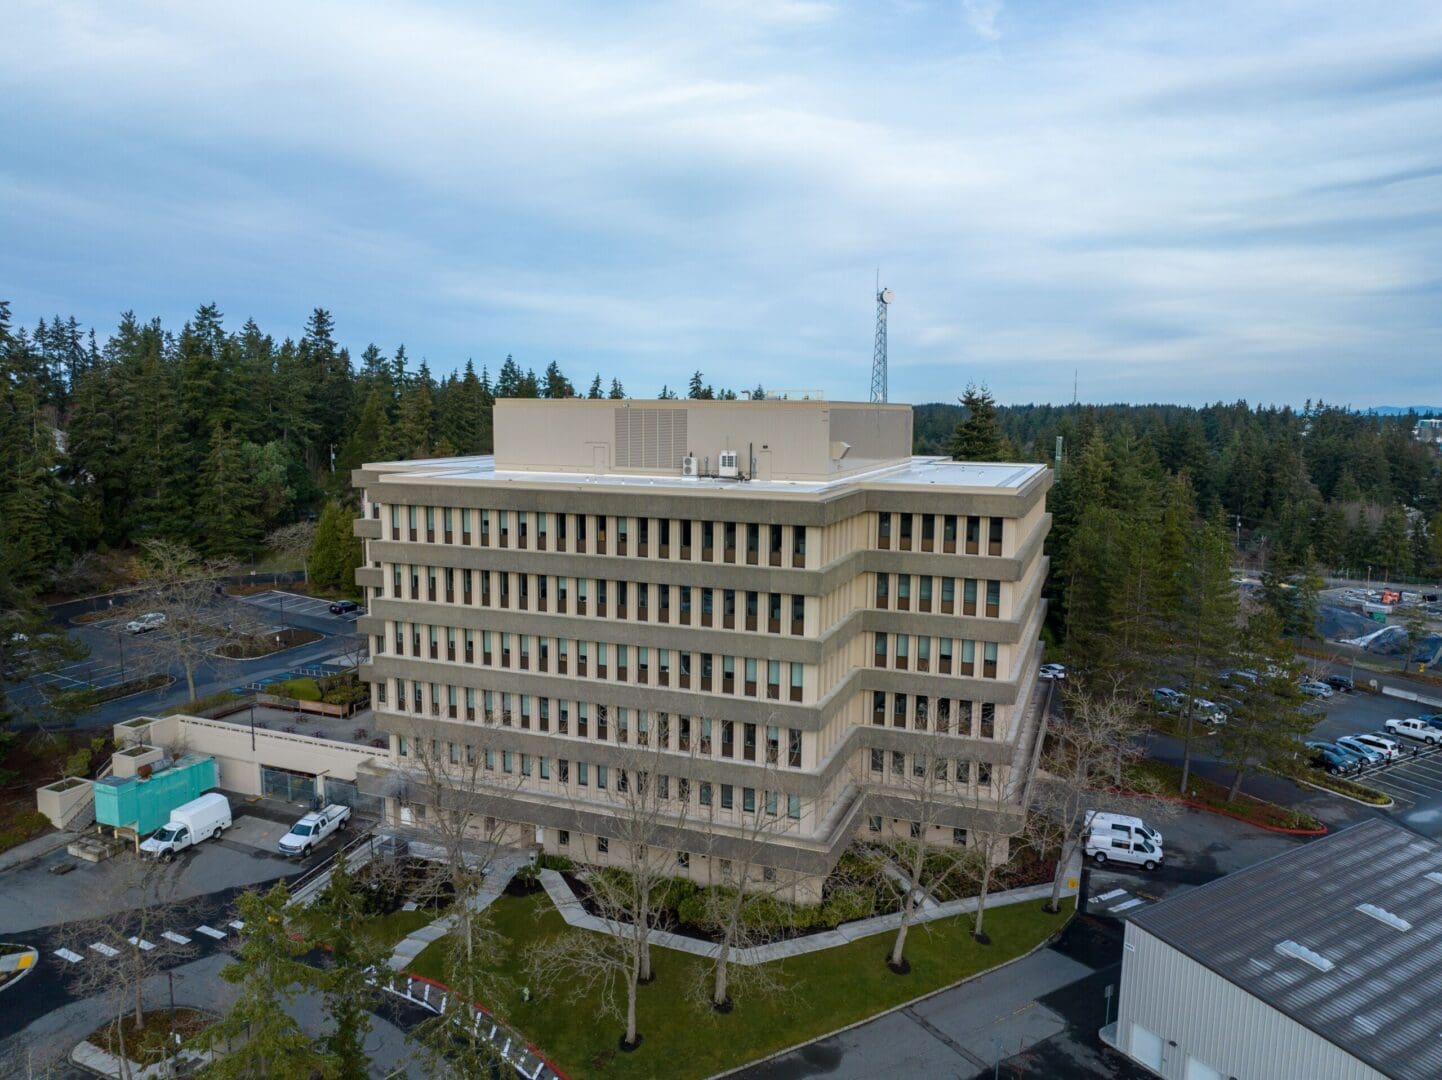 An aerial view of a large building in the middle of a forest.